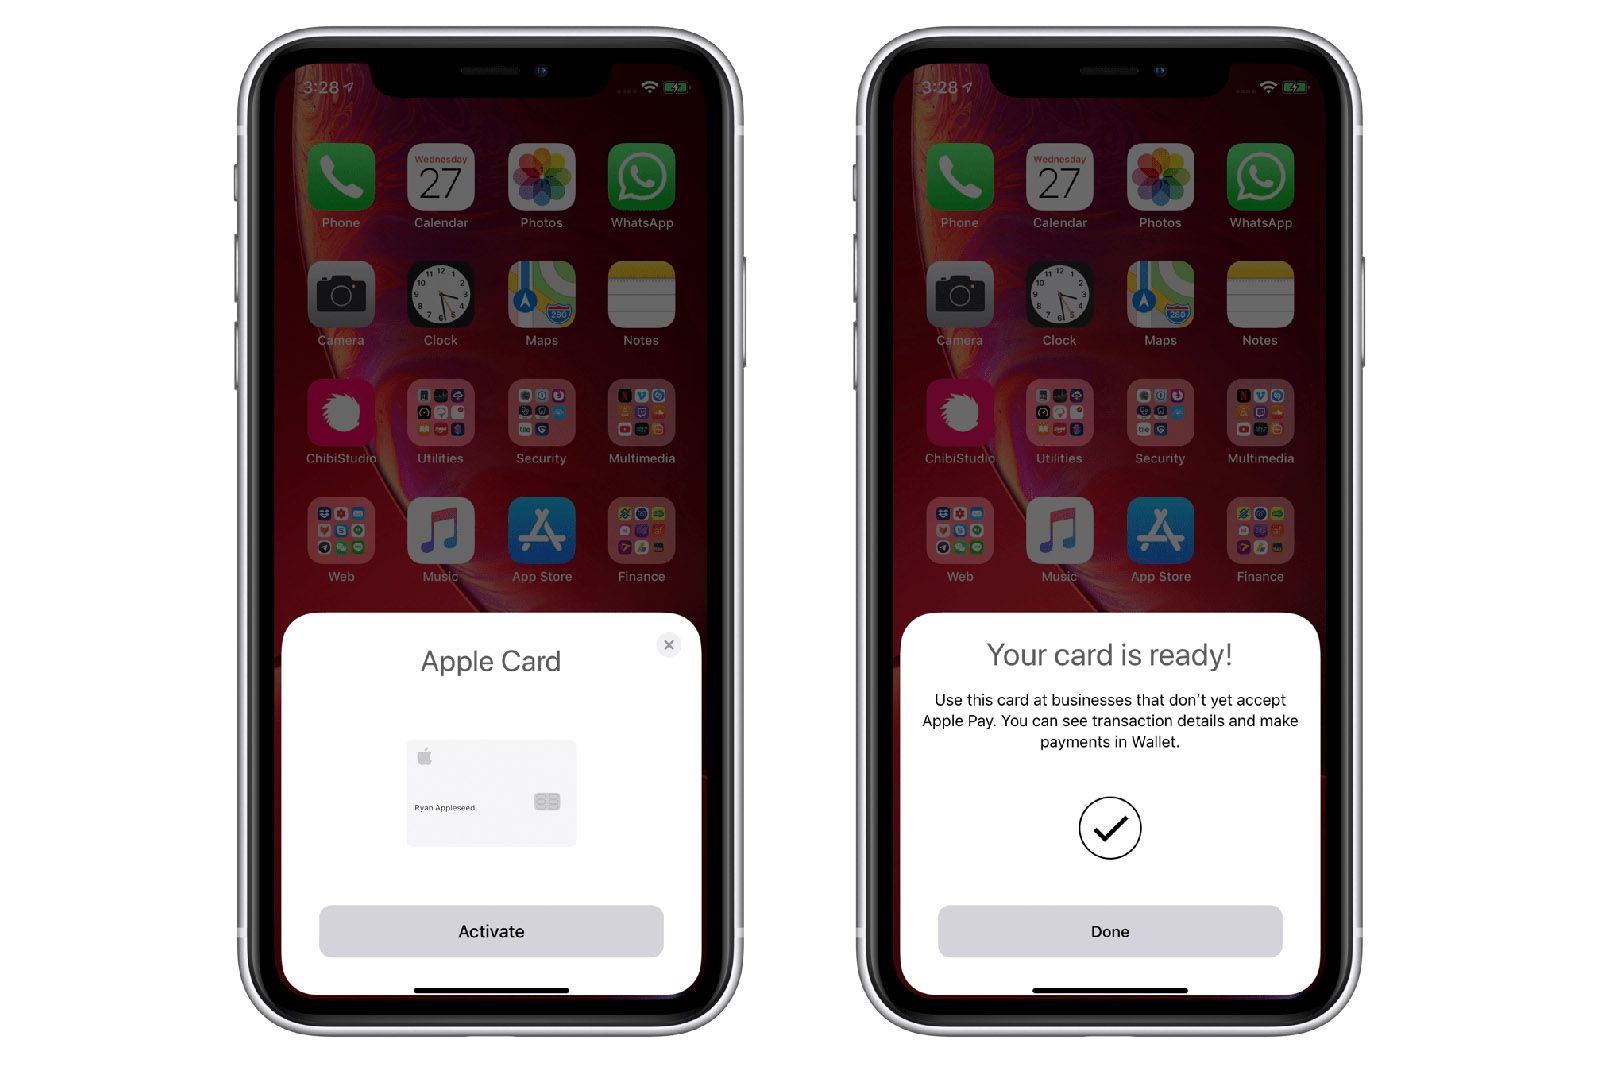 Apple Card will be recognised by your iPhone automatically for activation image 1